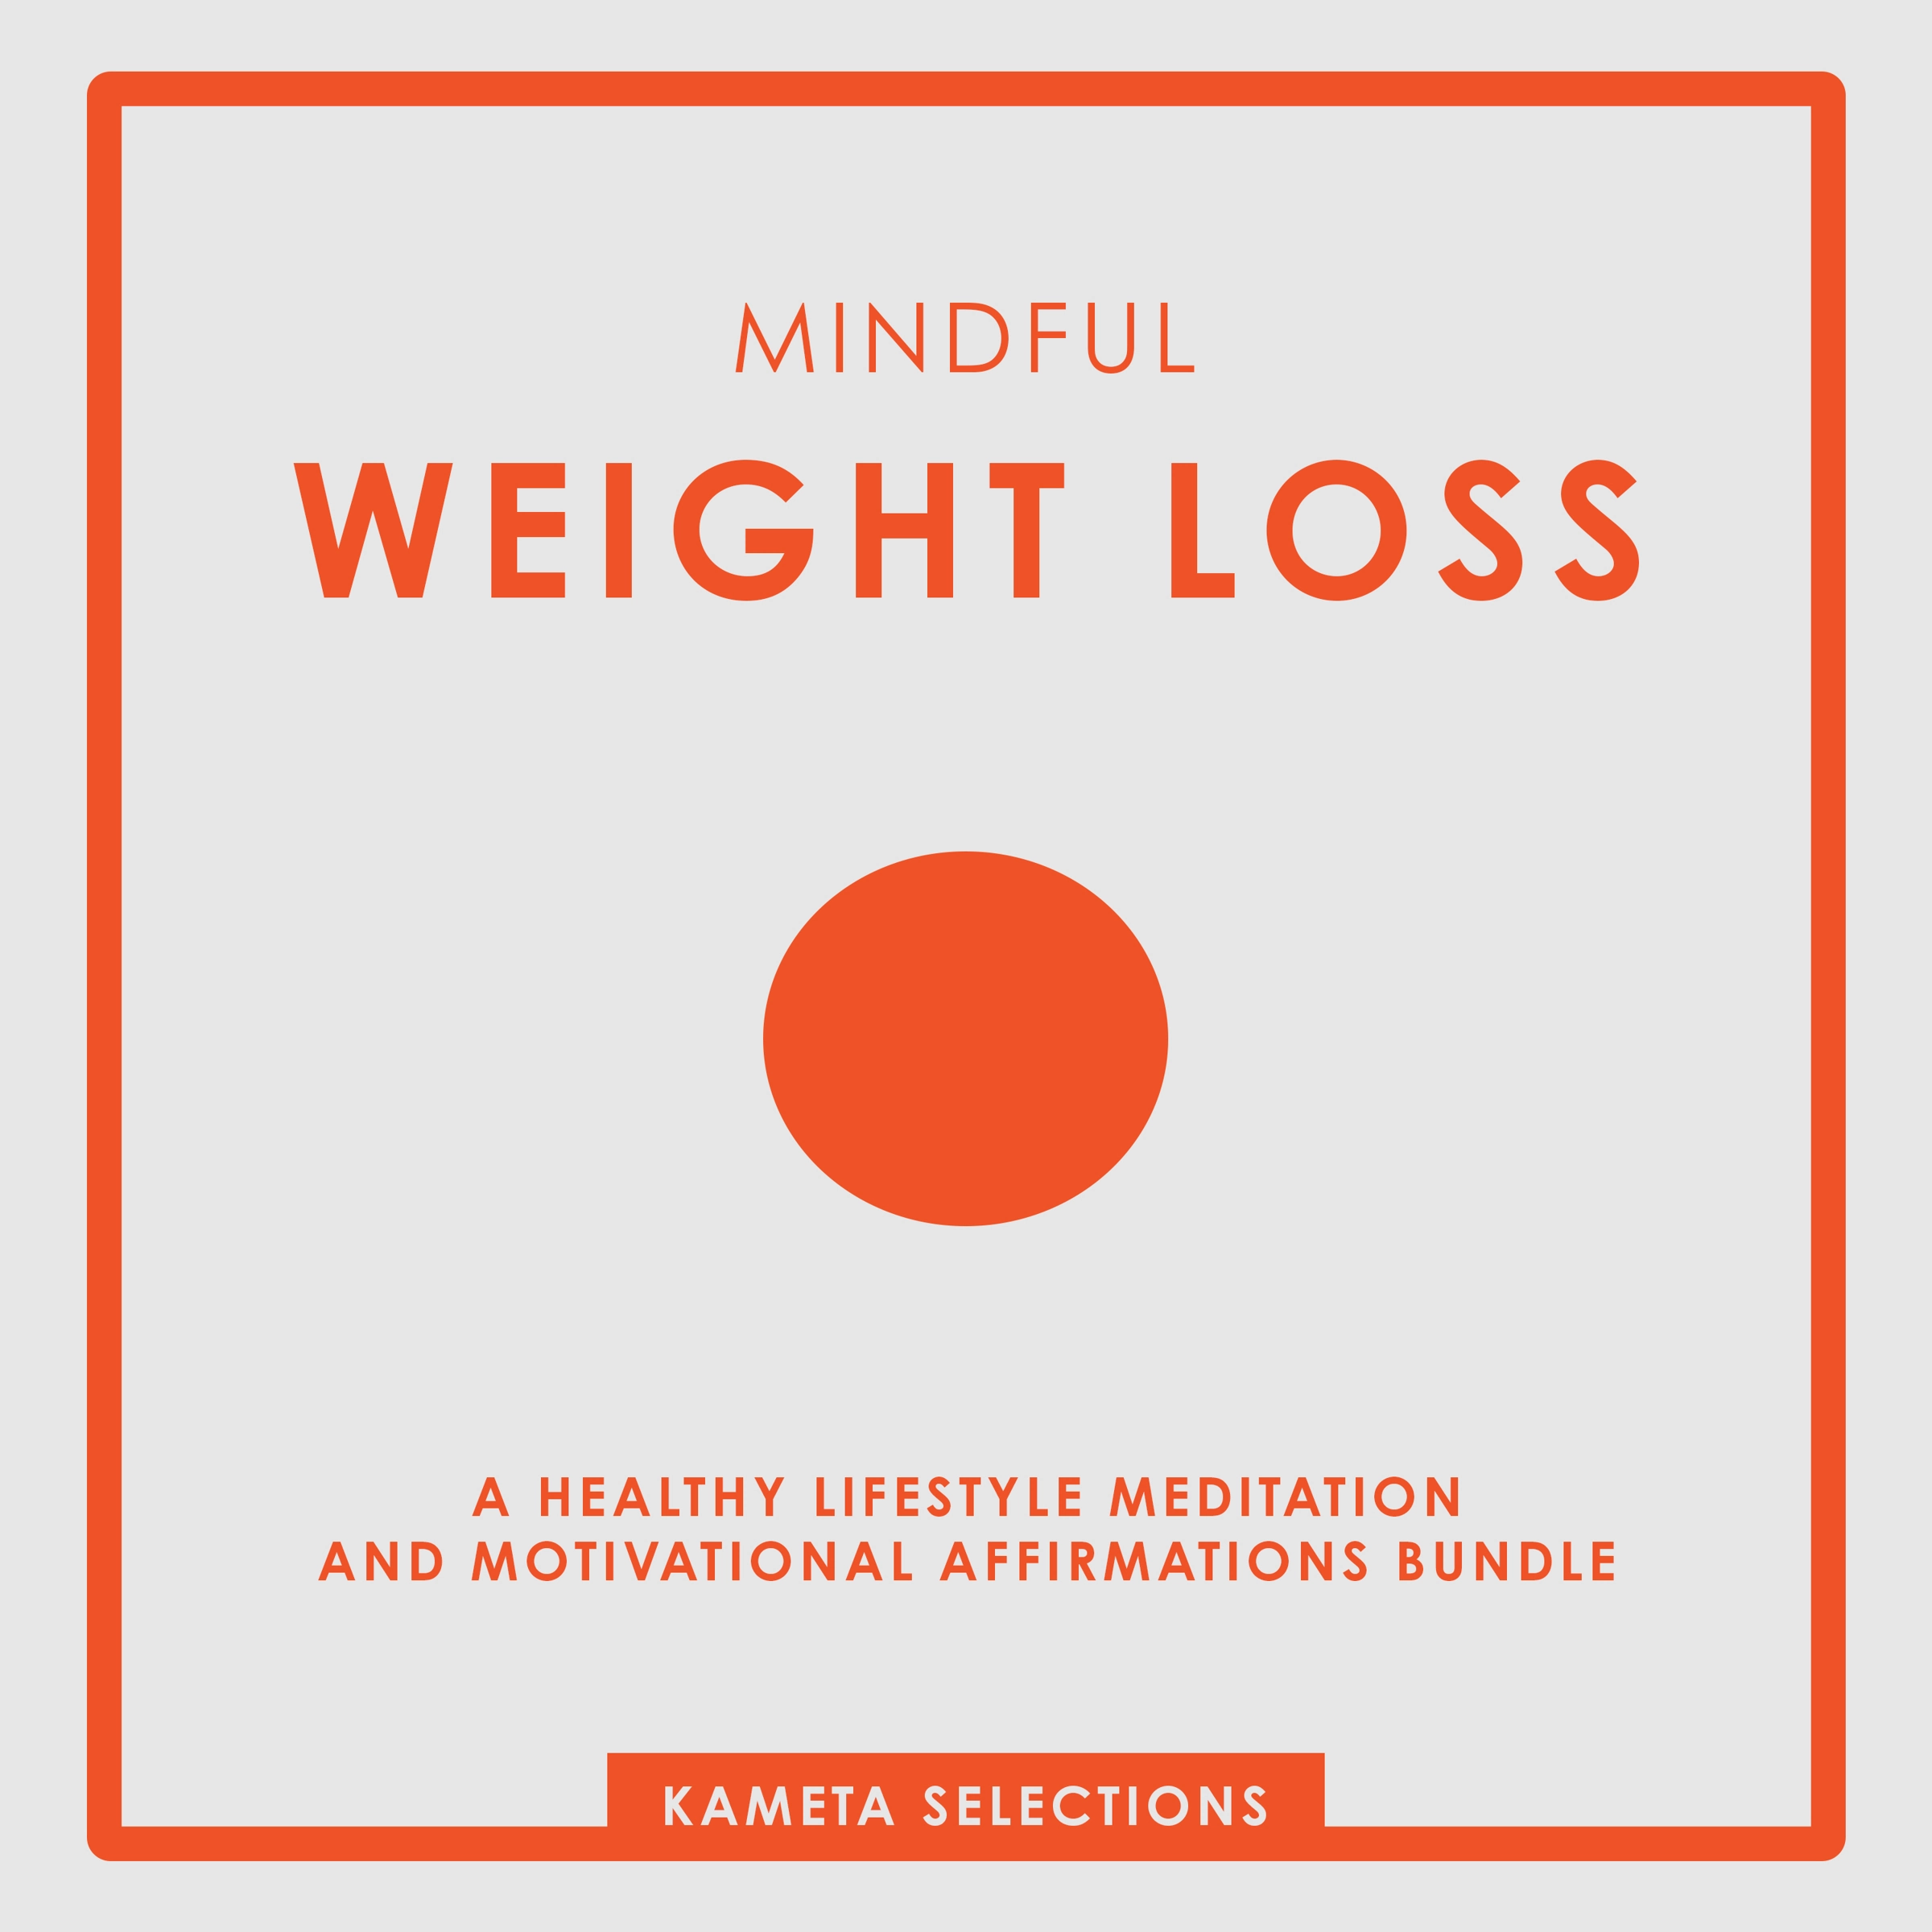 Mindful Weight Loss: A Healthy Lifestyle Meditation and Motivational Affirmations Bundle Audiobook by Kameta Selections